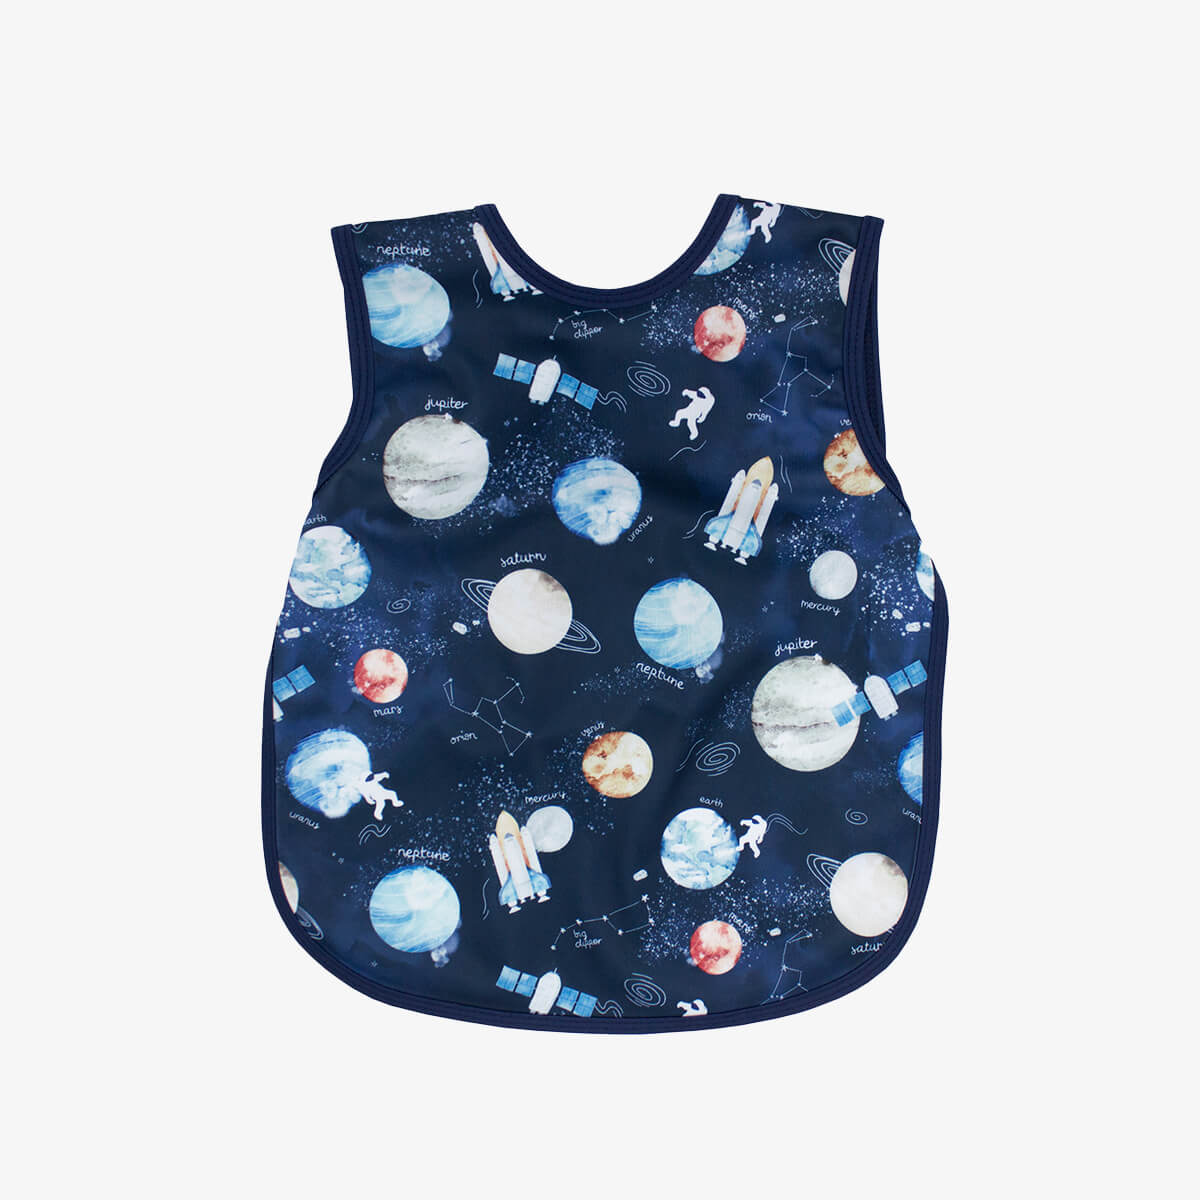 BapronBaby® Bapron in Outer Space / Bib + Apron That Safely Ties Around the Body